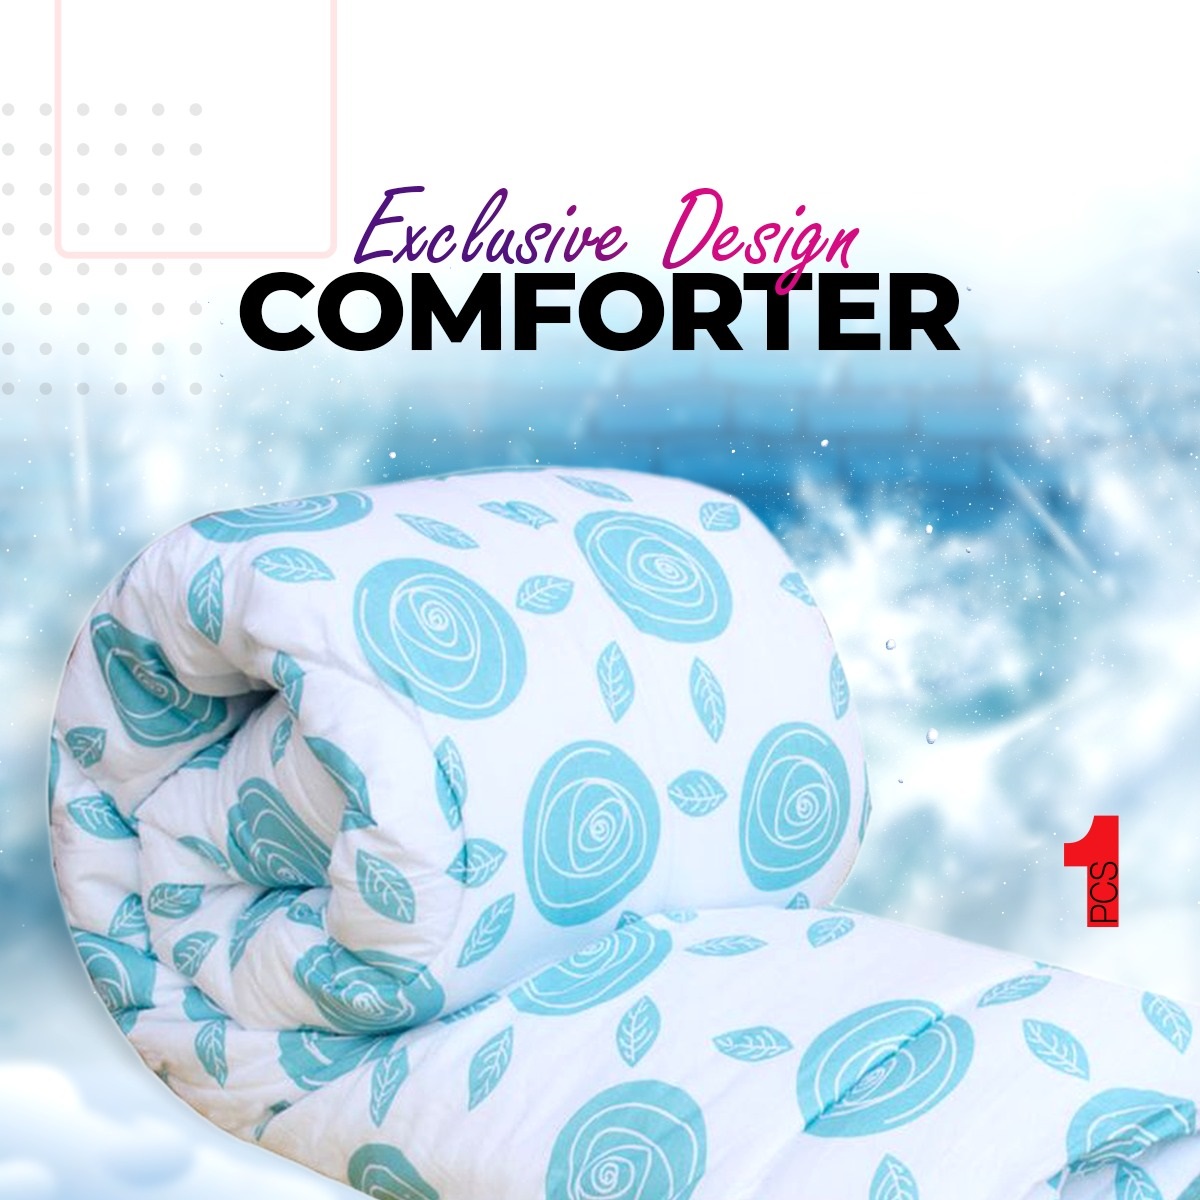 King Size Comforter Cotton Outside Fiber Filler Inside Too Warmth Perfect For Winter - LC011